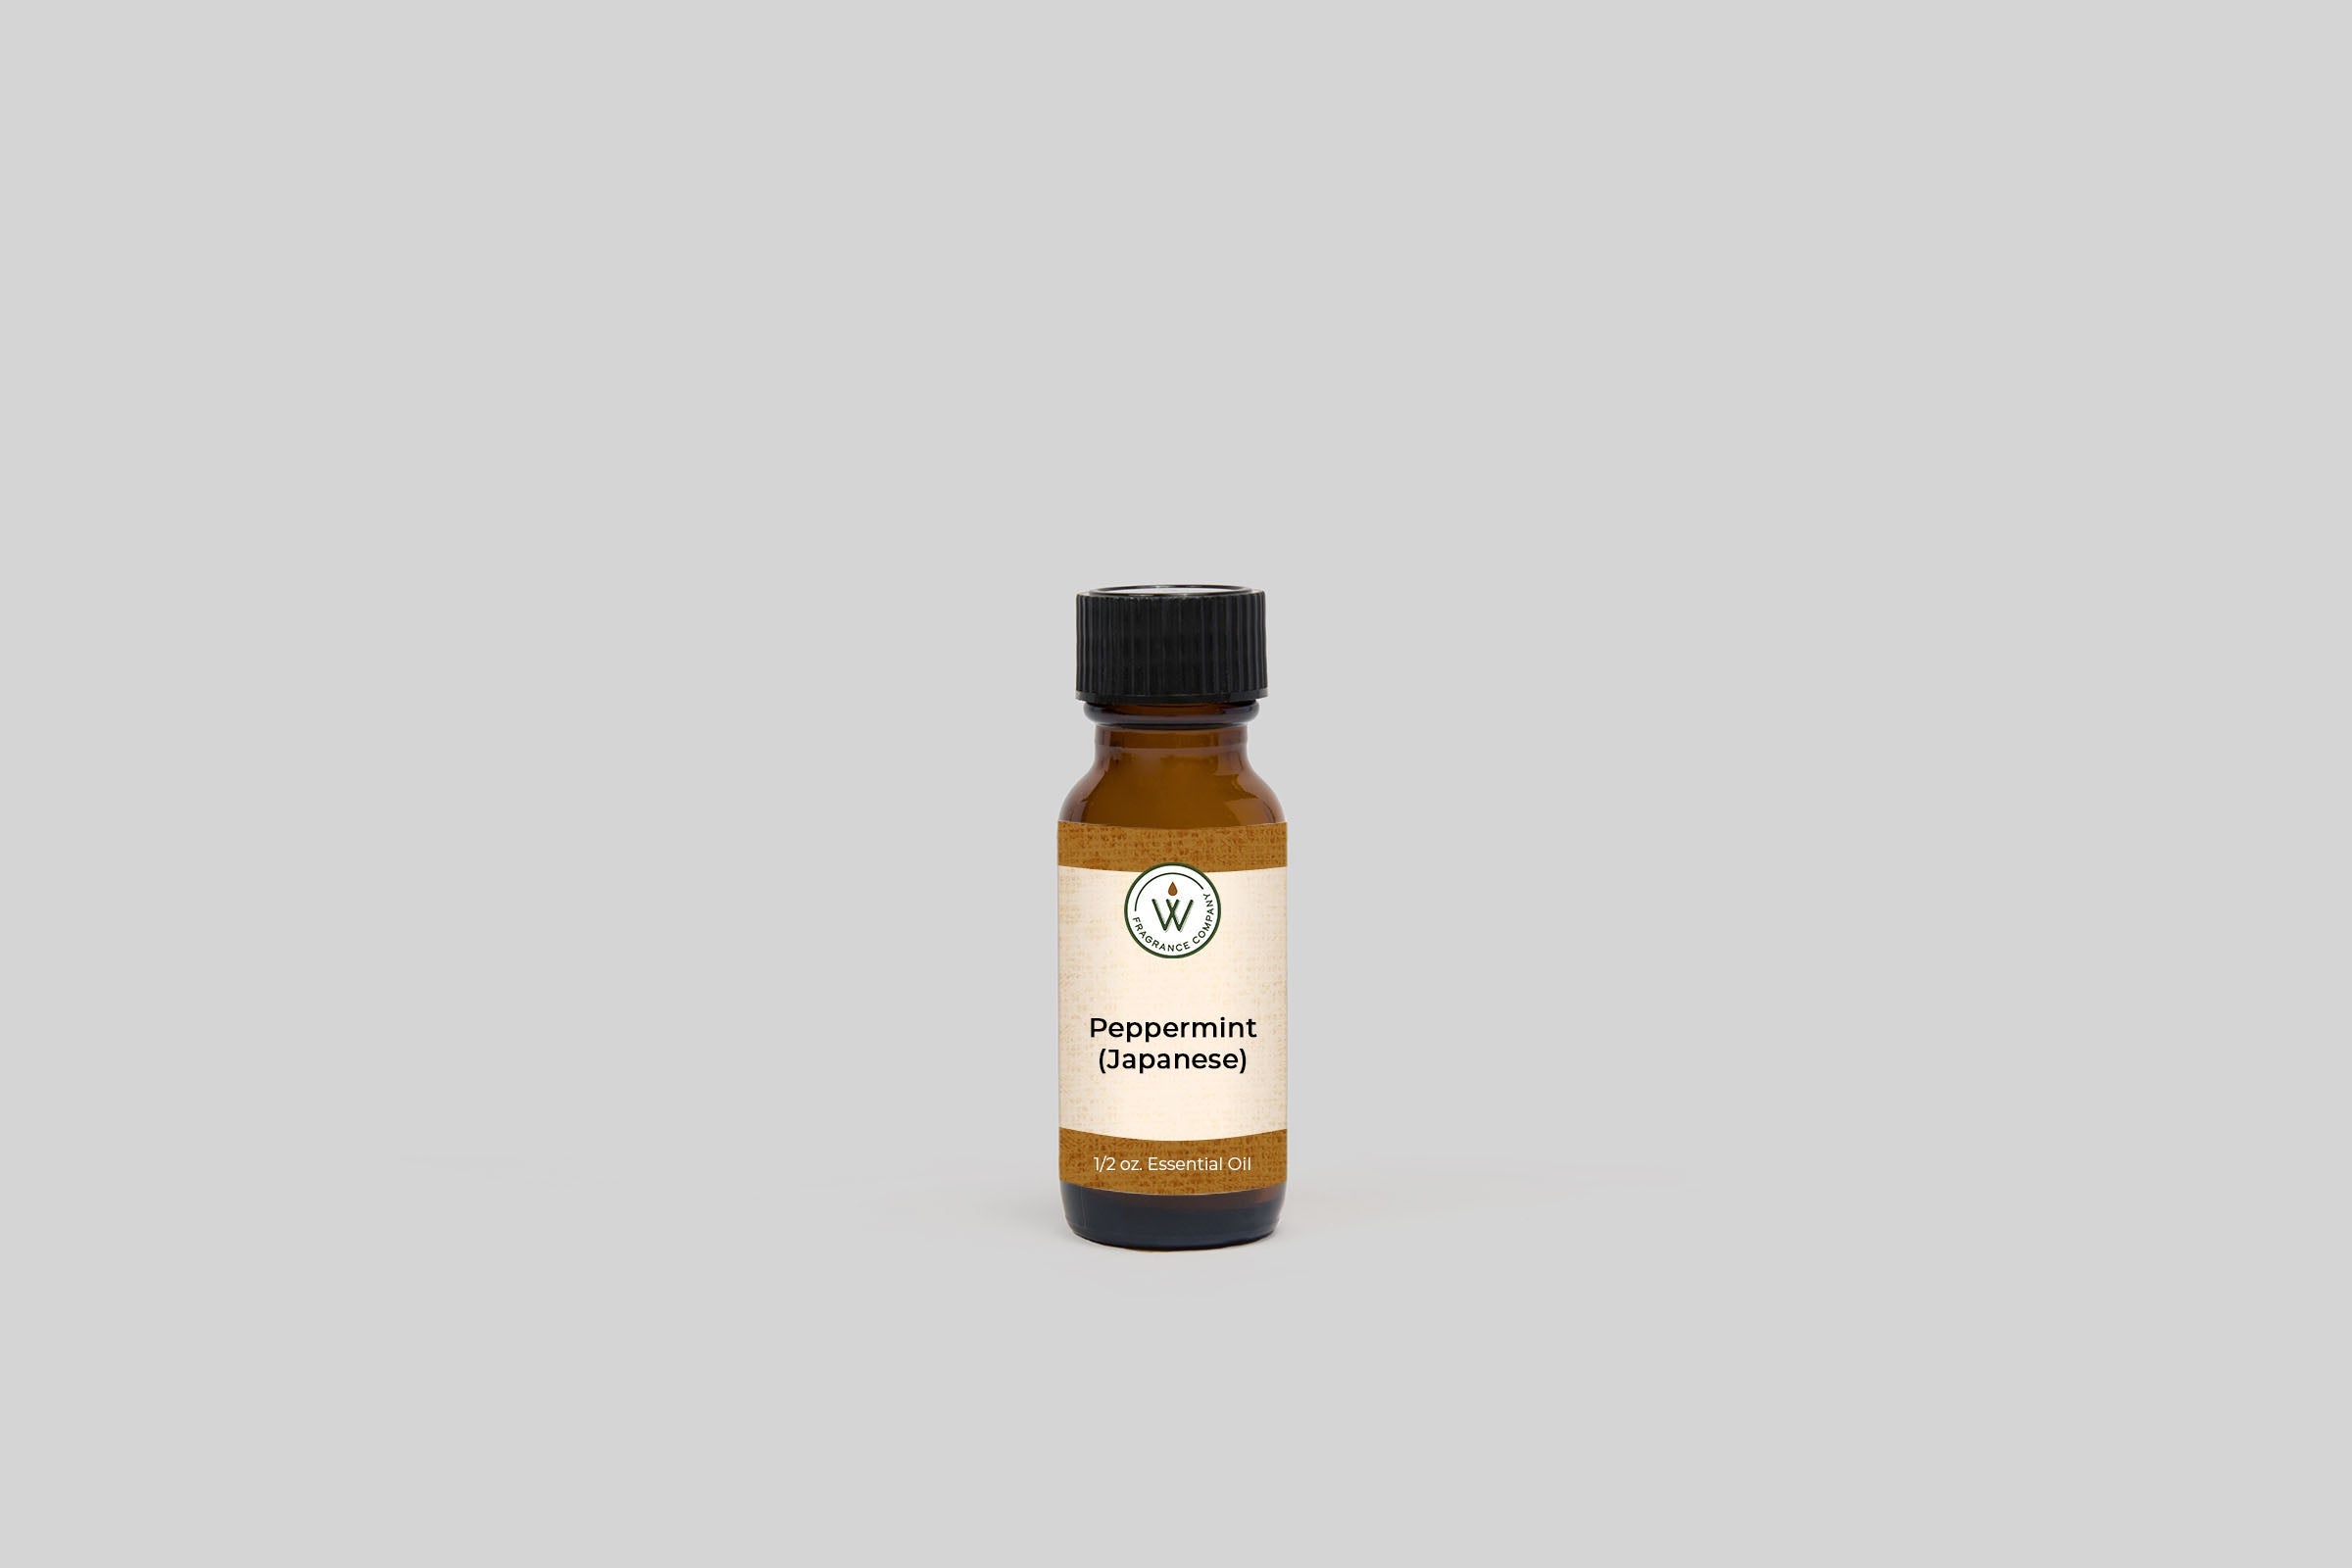 Peppermint (Japanese) Essential Oil